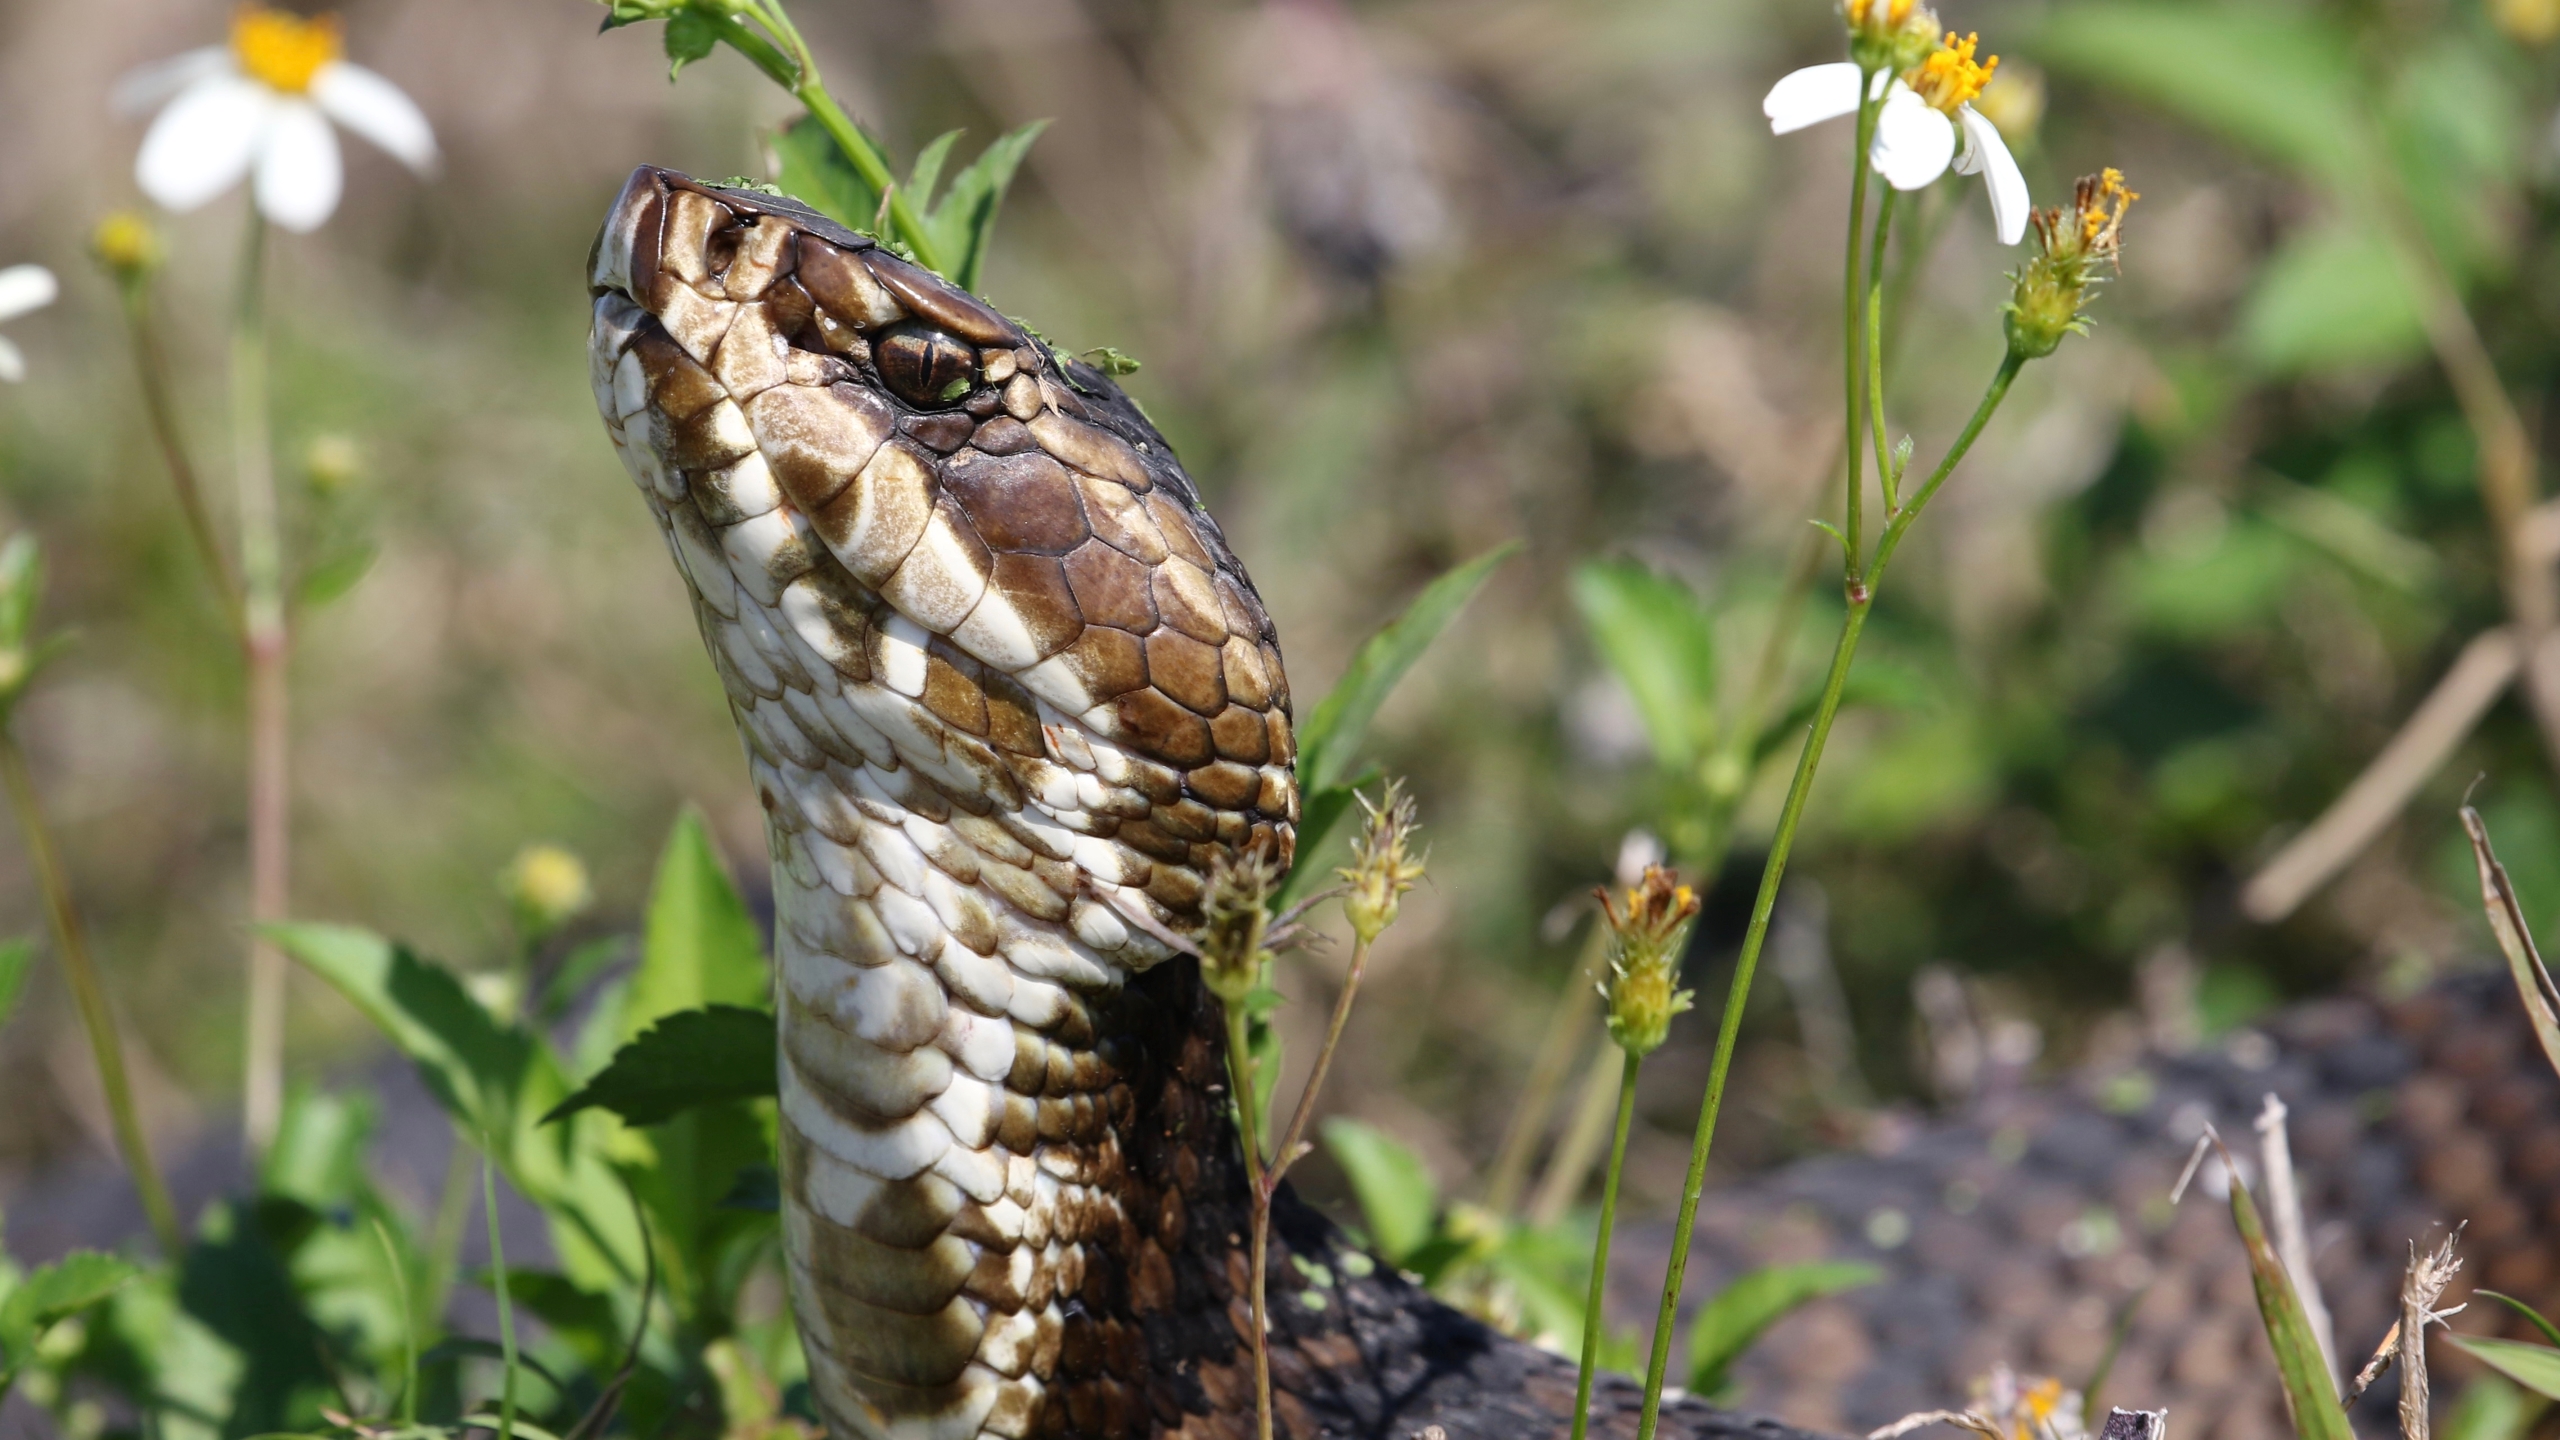 A photo of a cottonmouth (water moccasin) looking up from the grass.